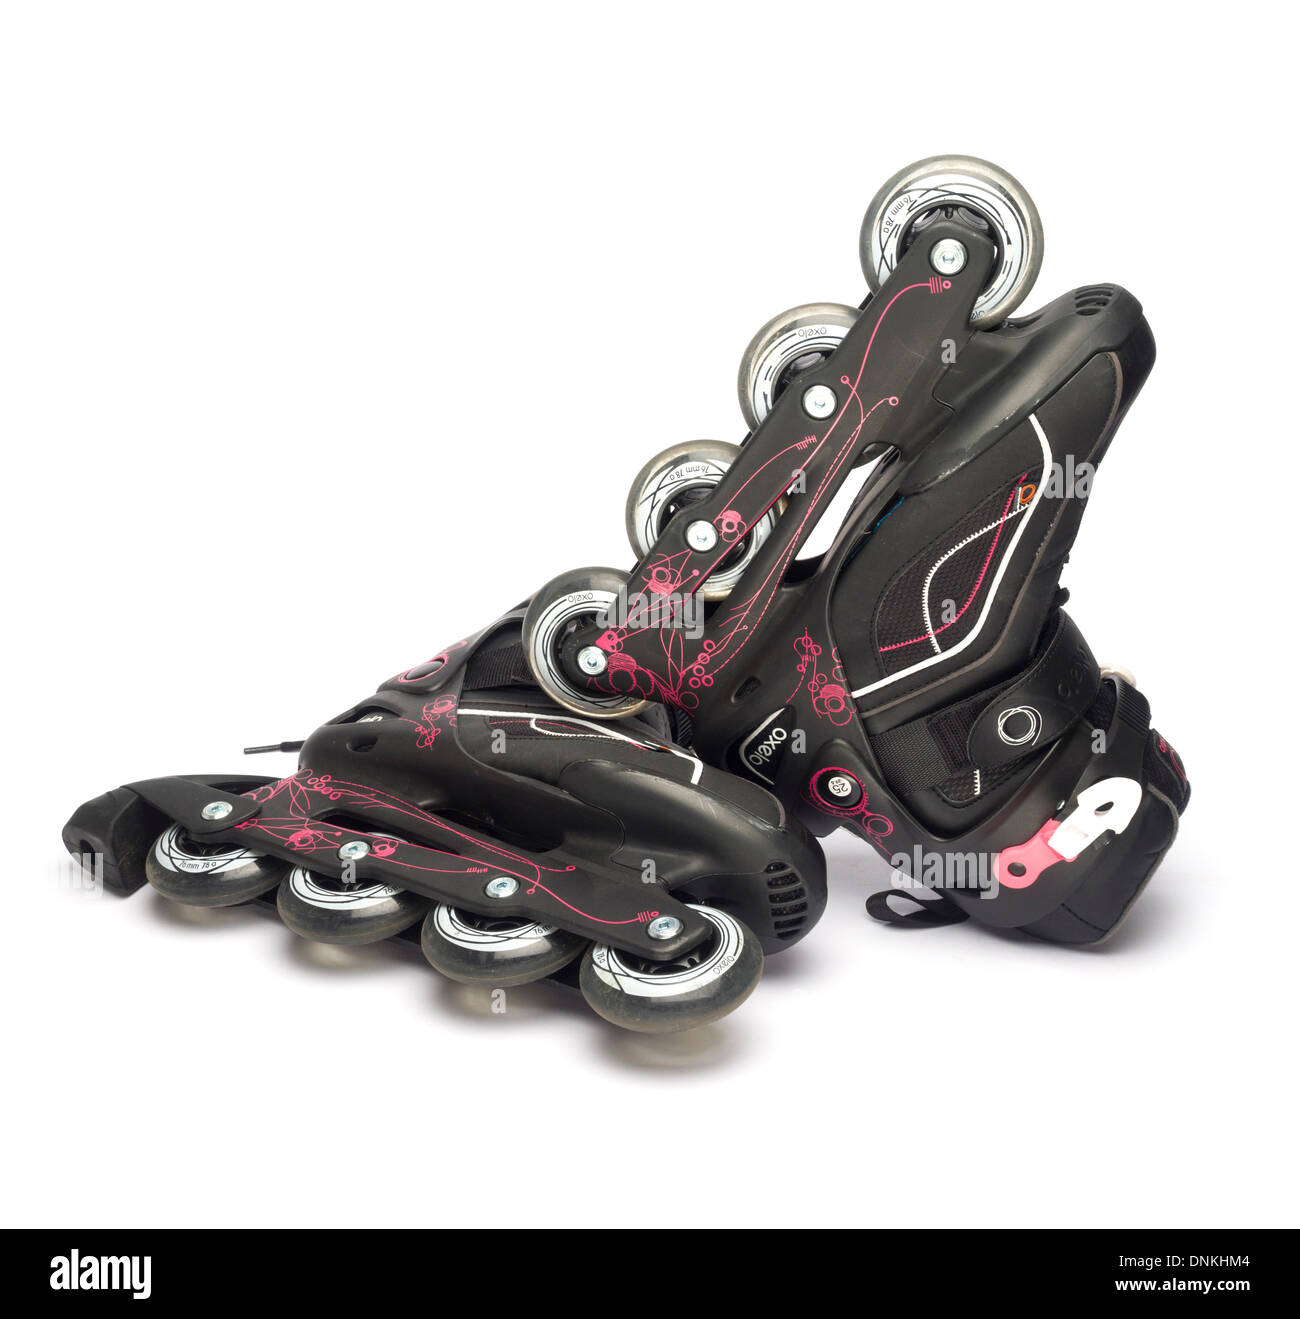 Roller blades cutout isolated on white background Stock Photo